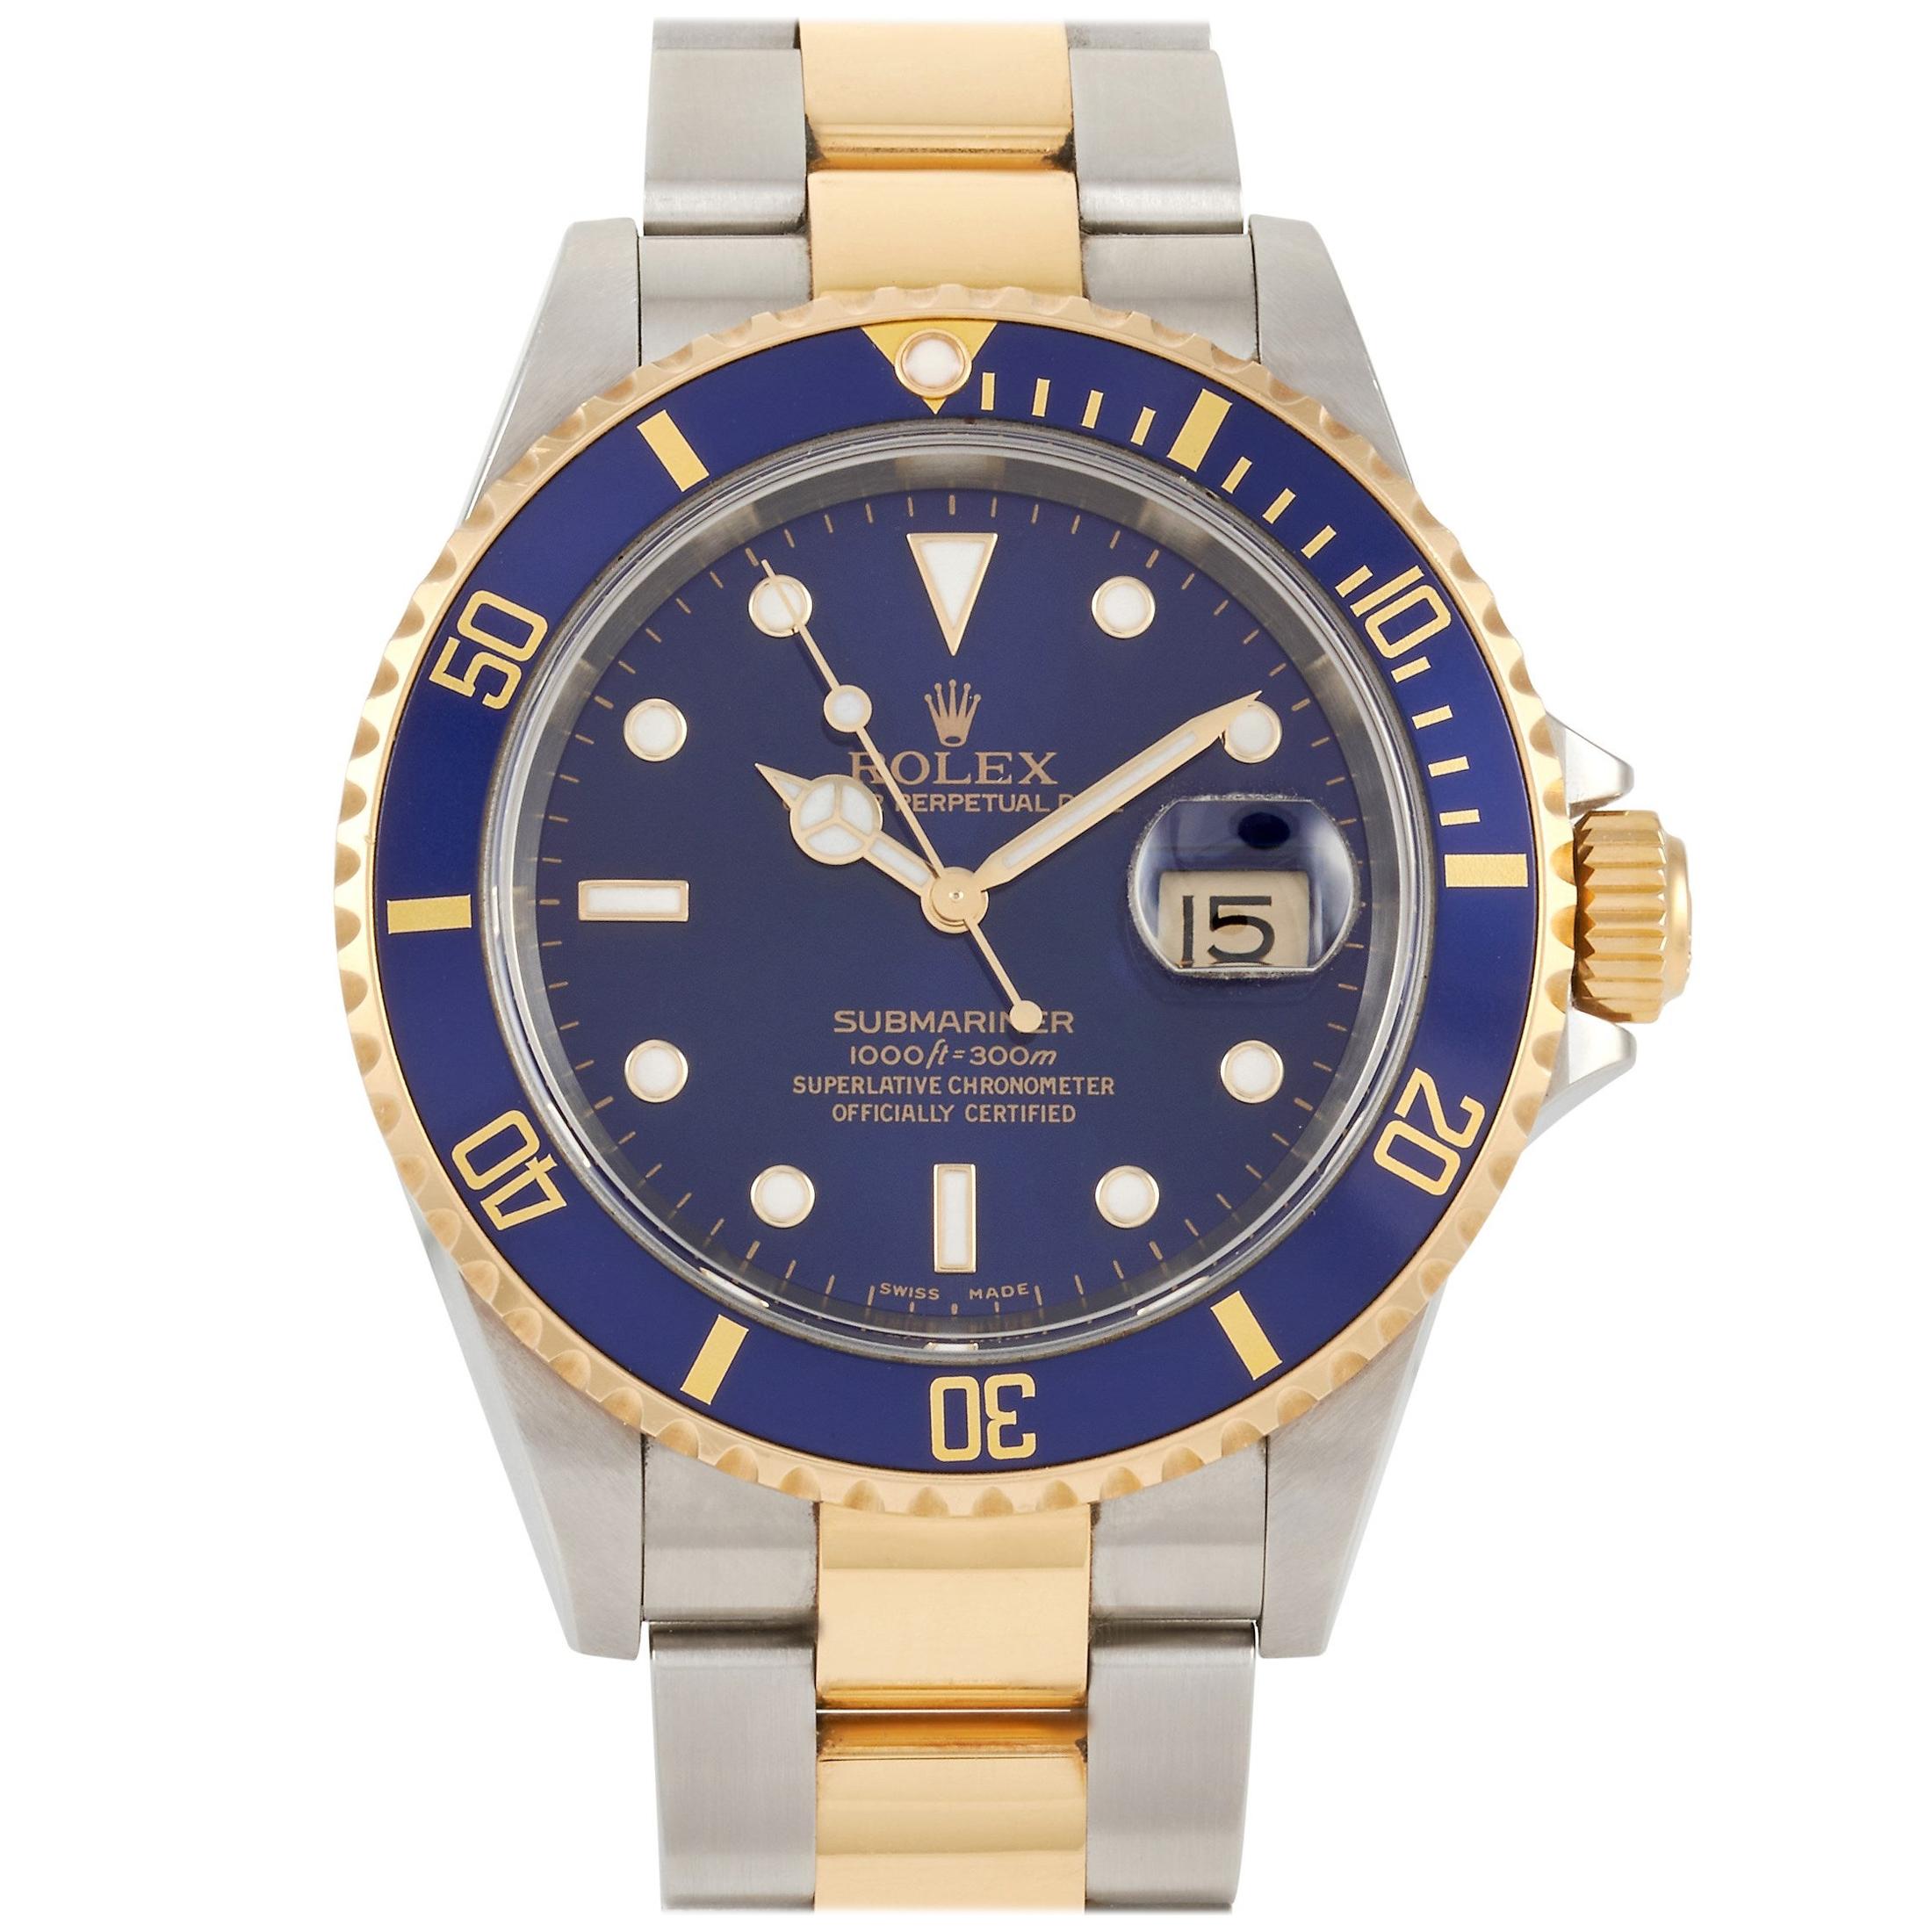 Rolex Submariner Two-Tone Bluesy Automatic Watch 16613